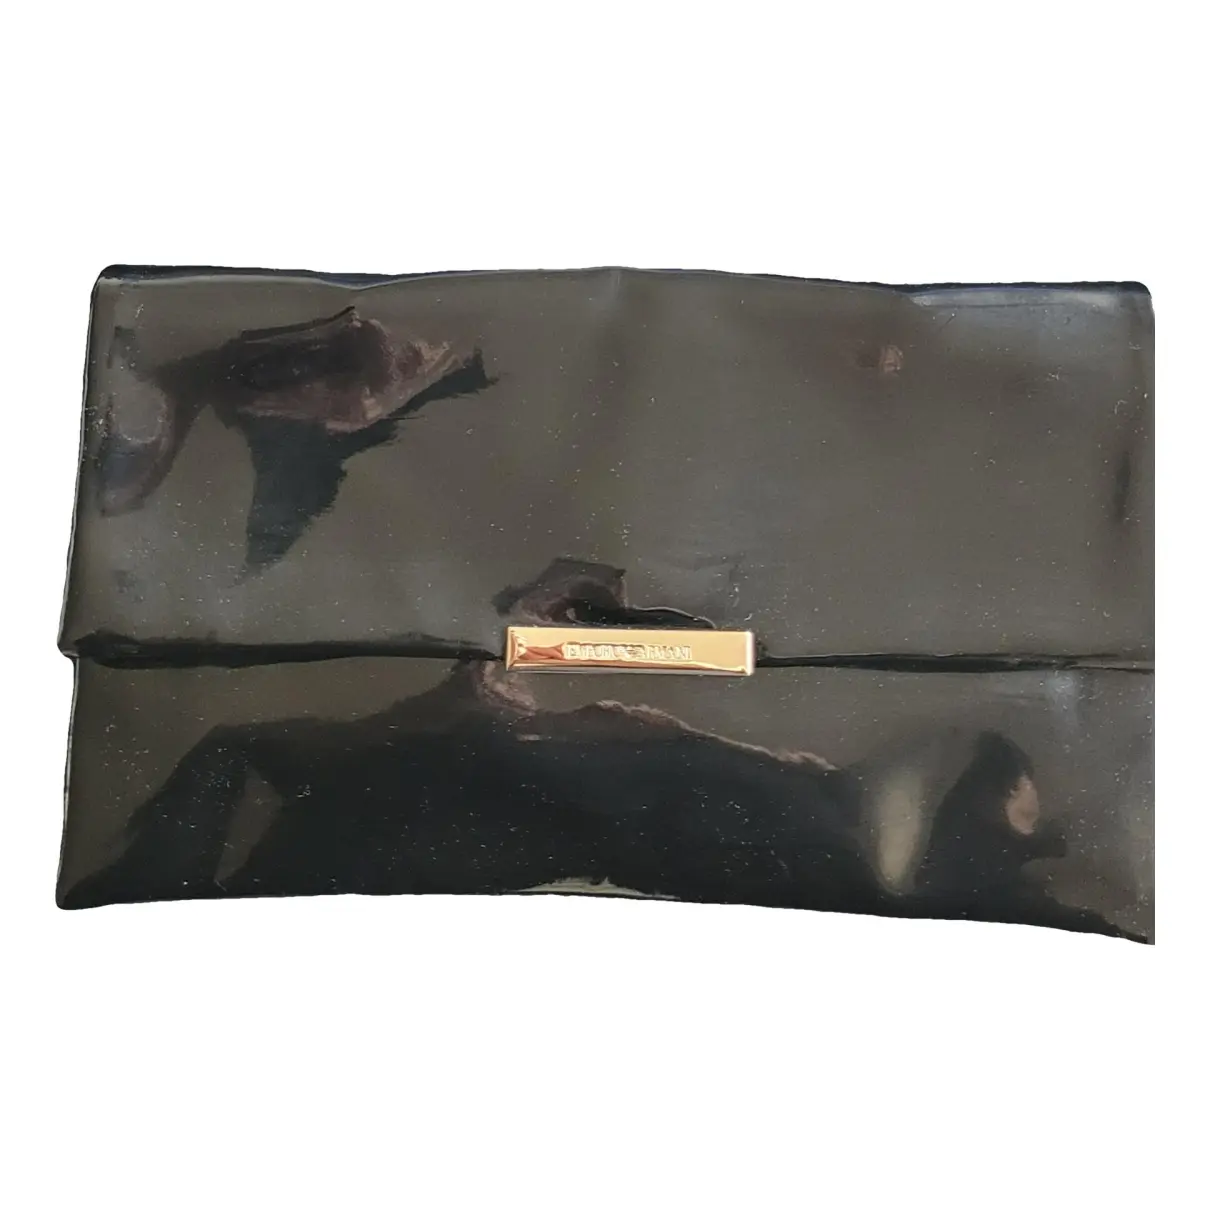 Patent leather clutch bag